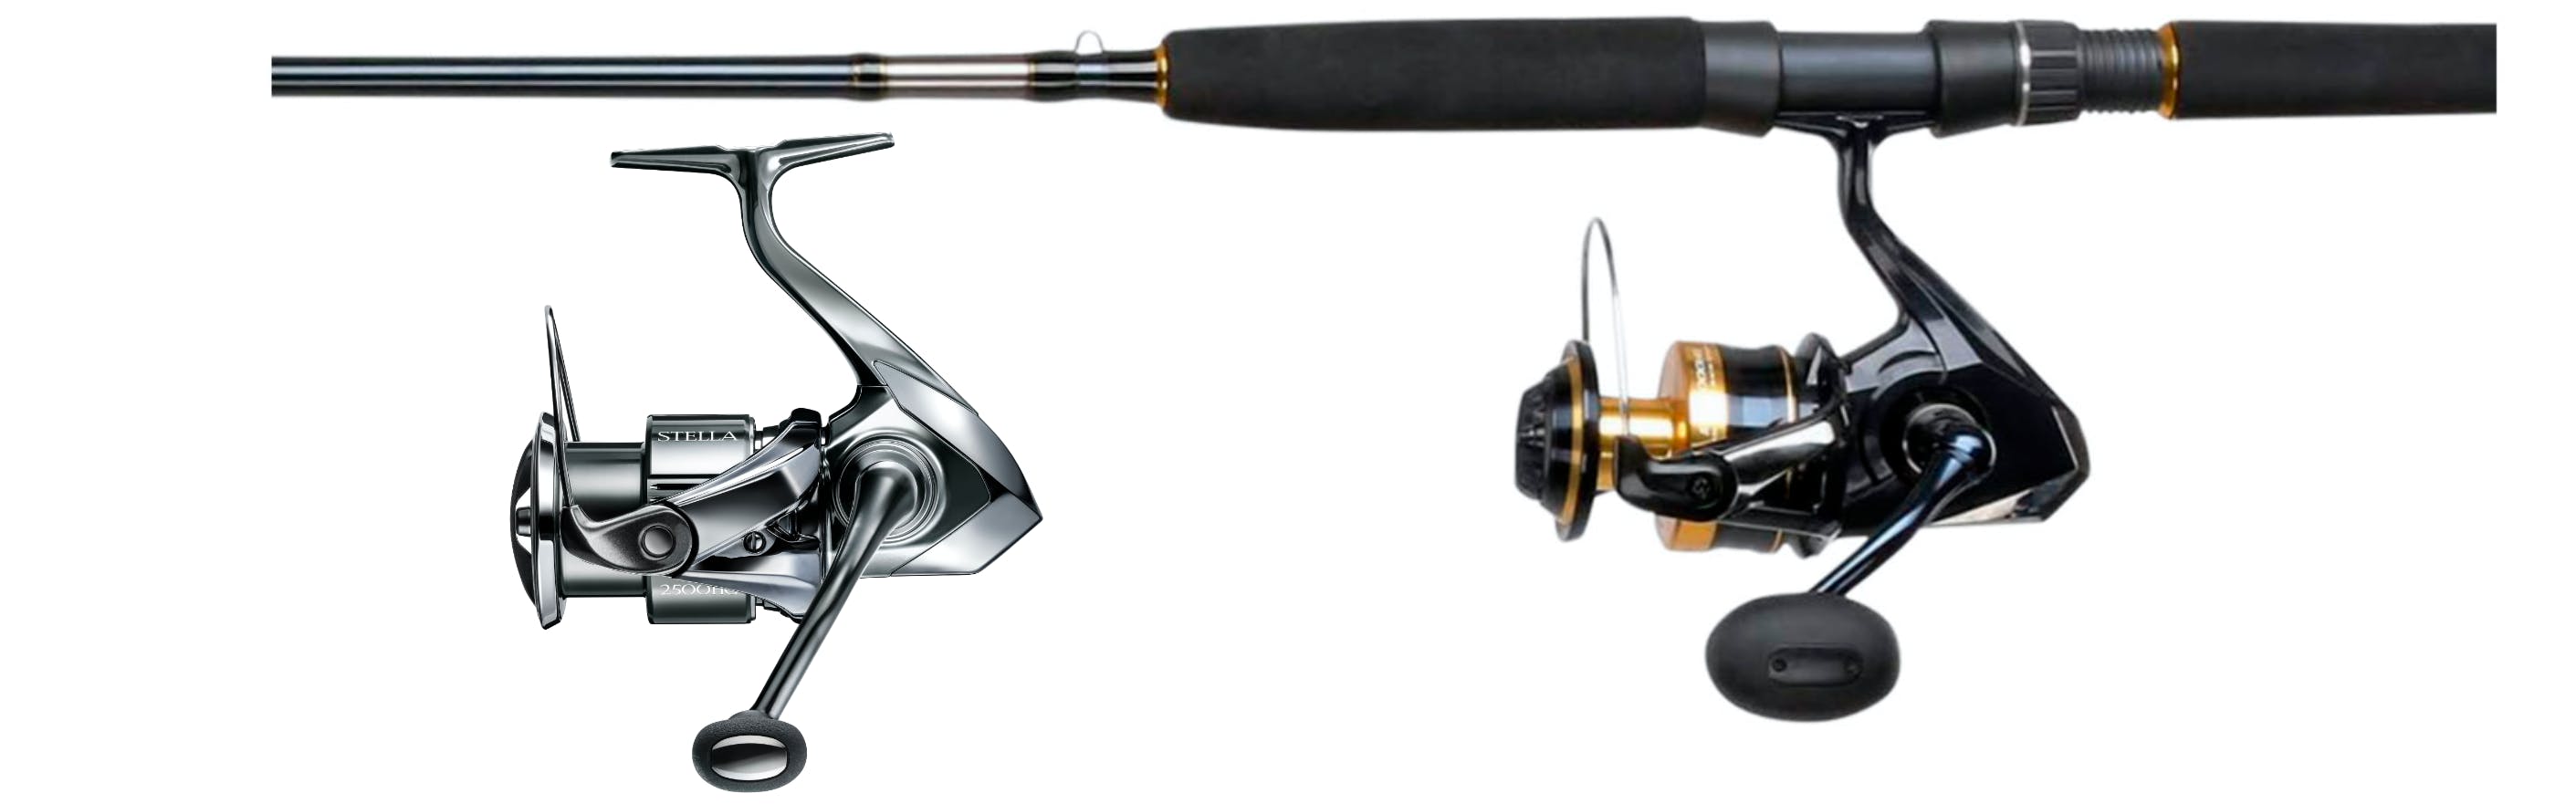 Product images of the Shimano Spheros SW Combo and the Shimano Stella FK.